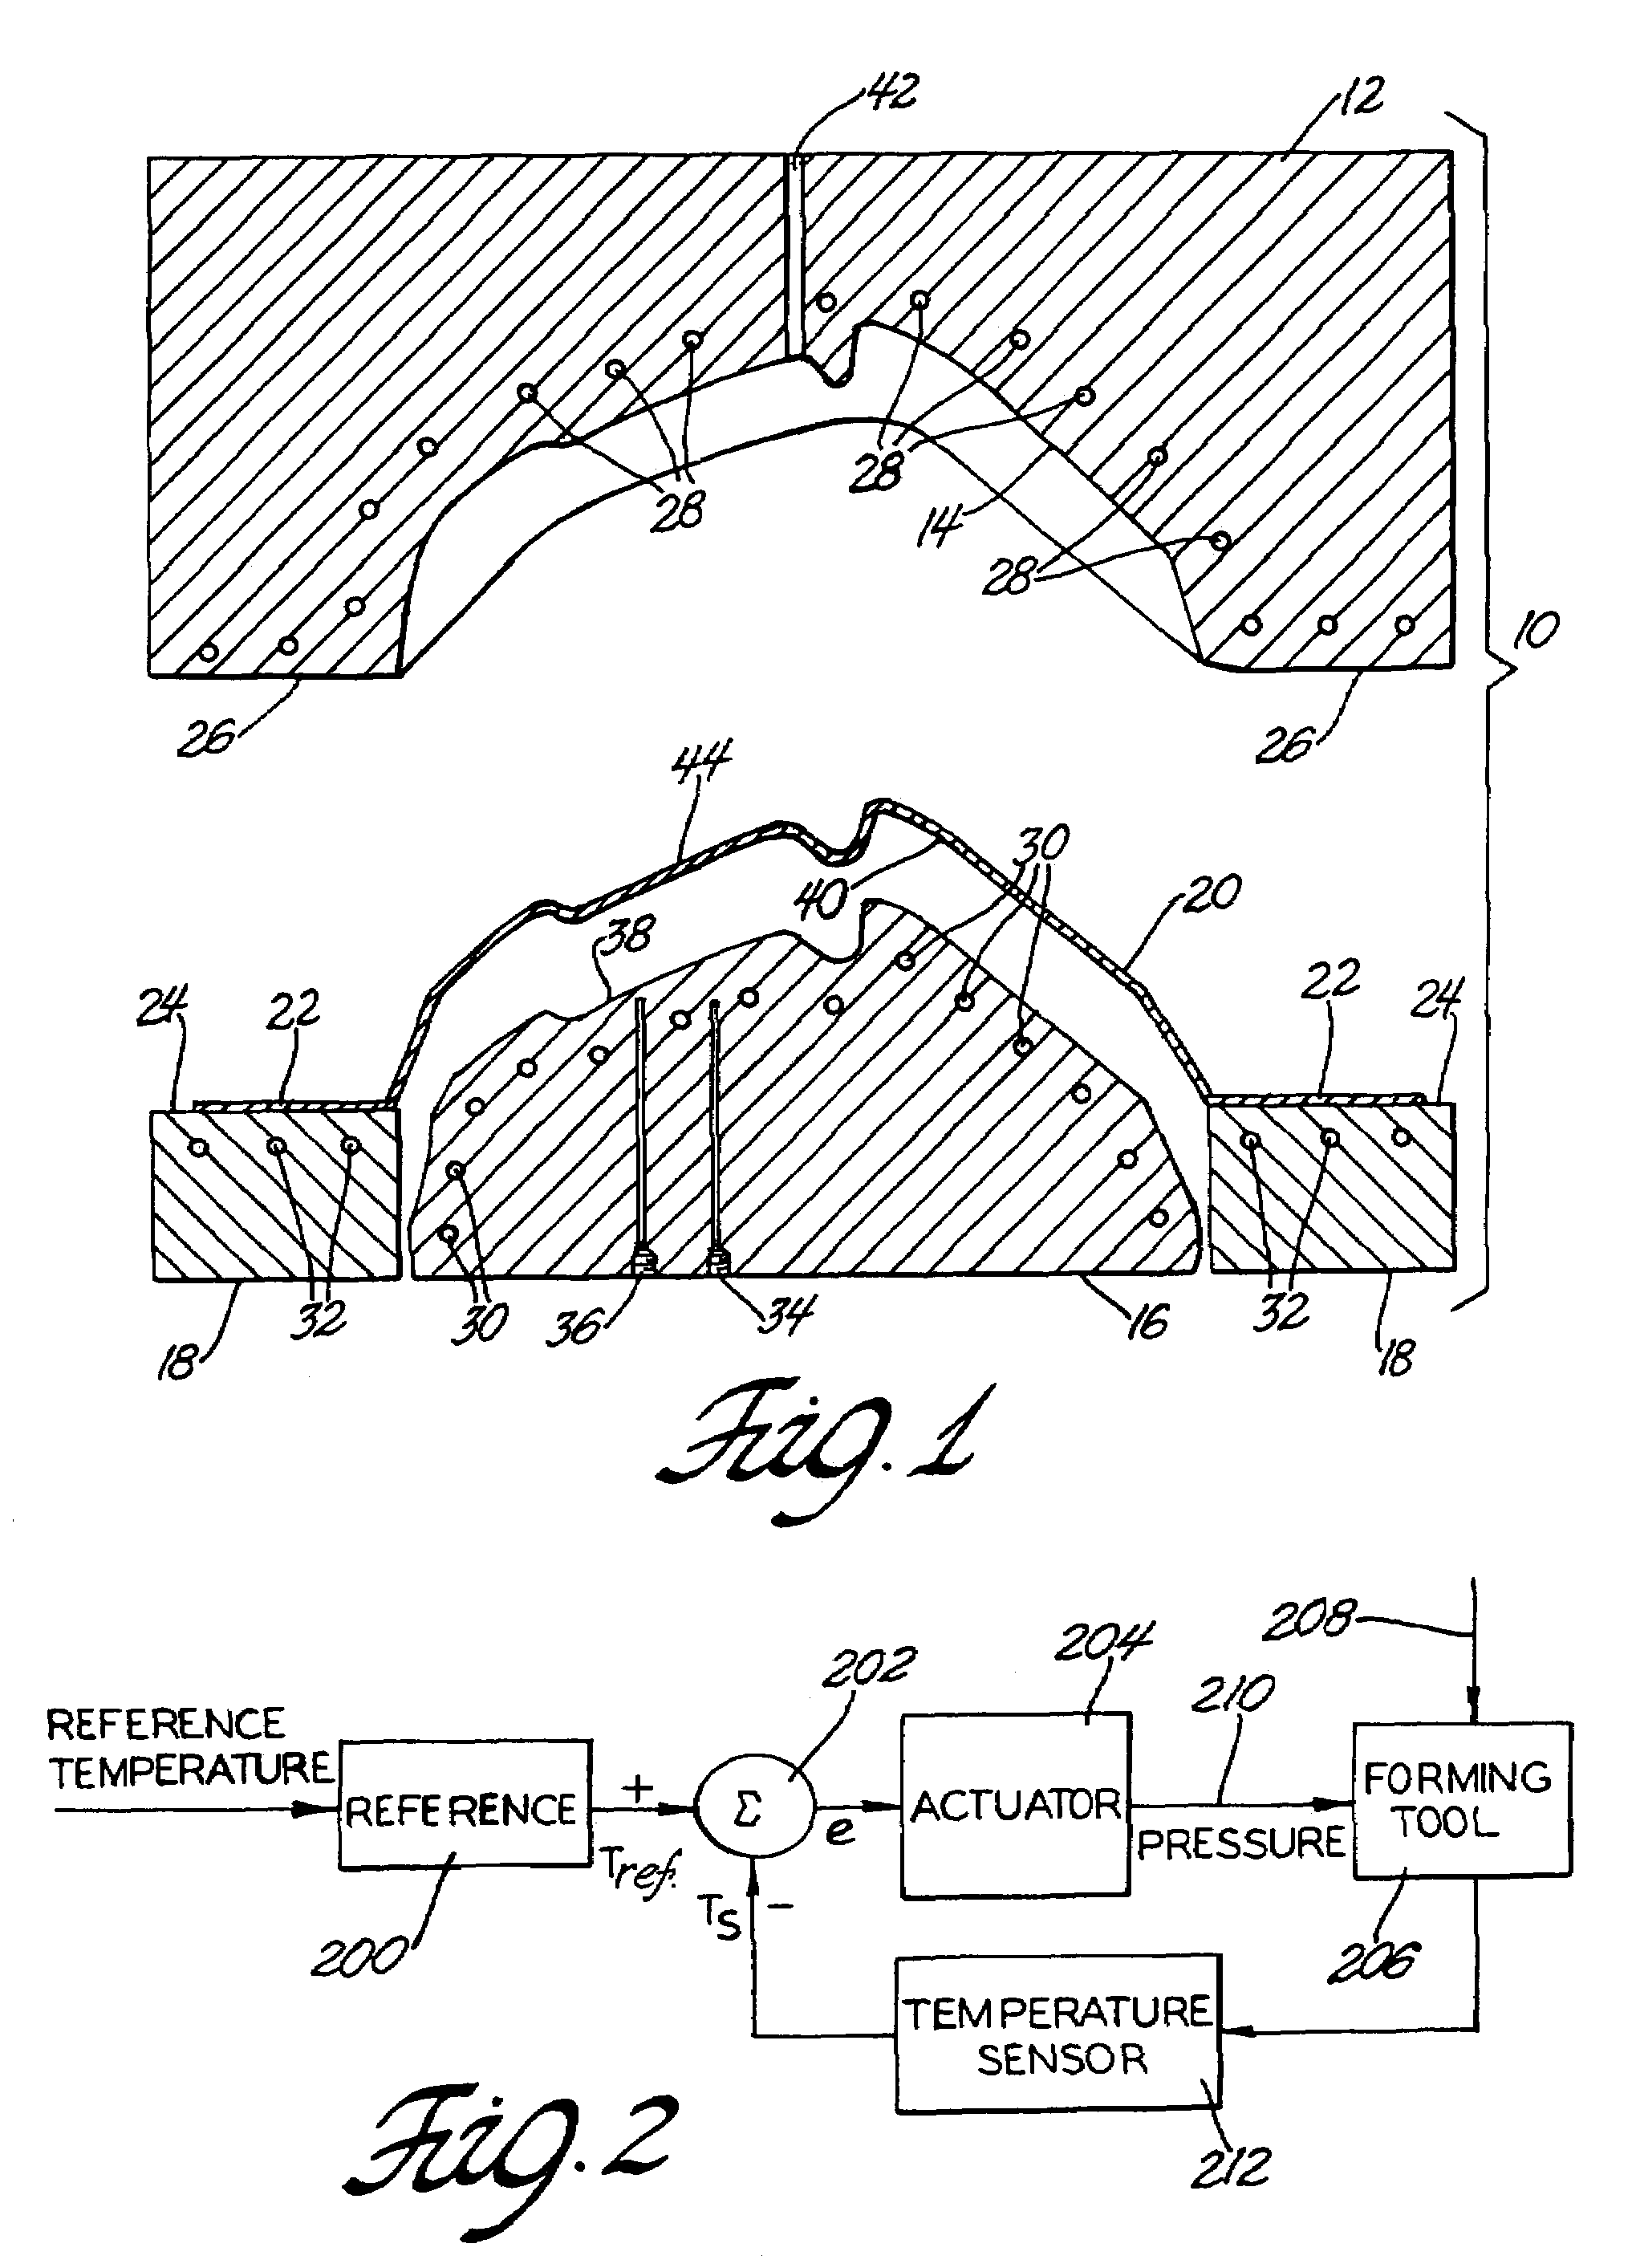 Hot blow forming control method